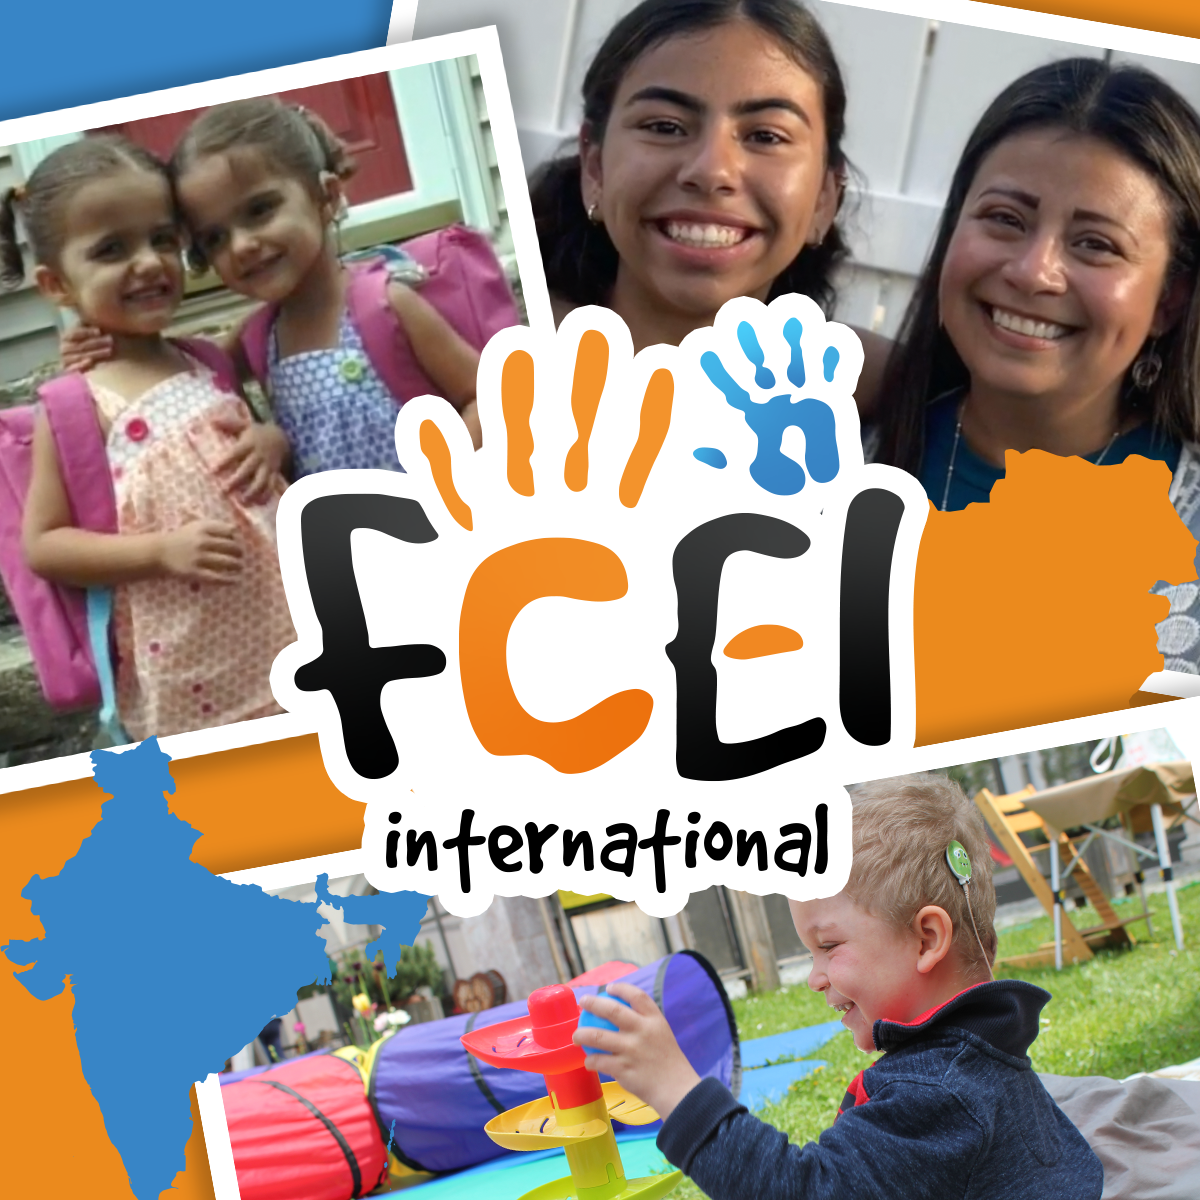 Photos of children and young adults with overlay of FCEI logo